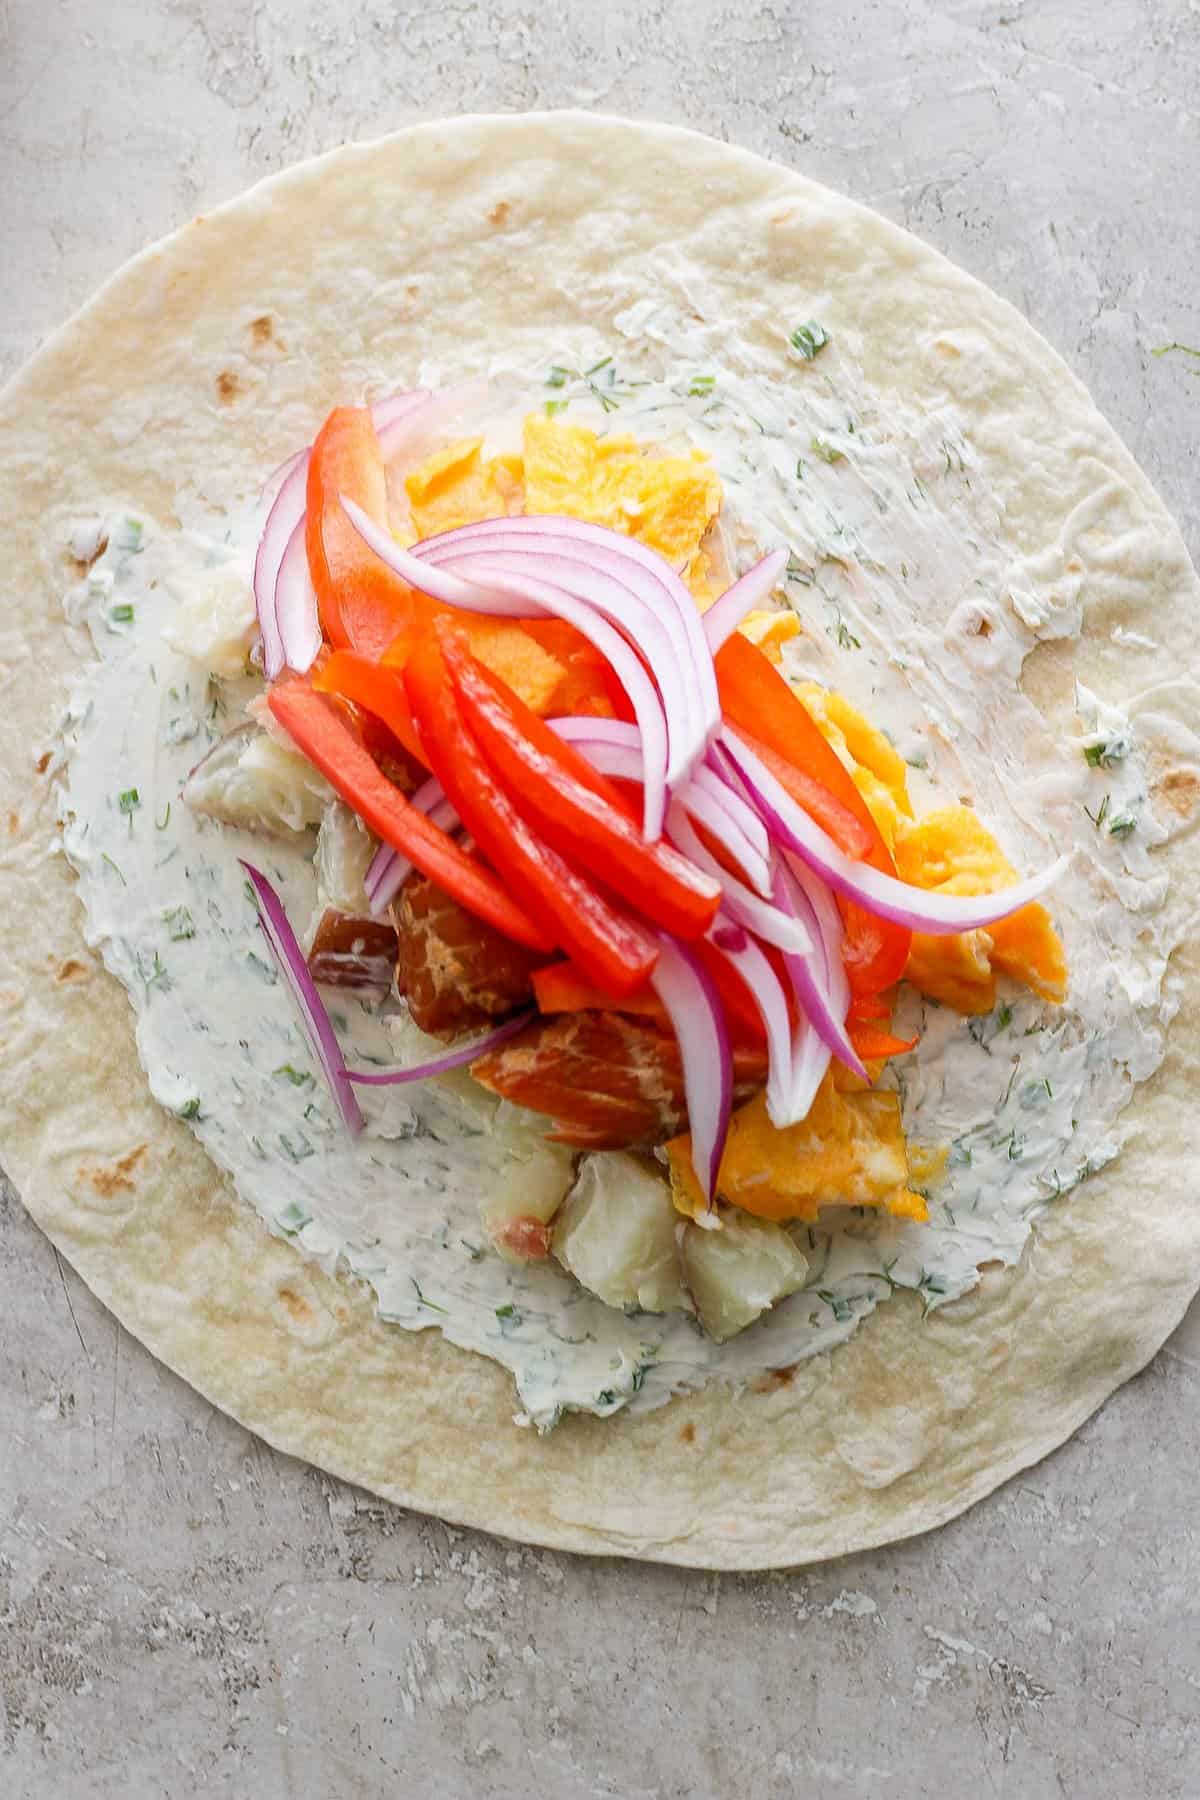 A flour tortilla spread with herb cream cheese topped with slices of red bell pepper, red onion, and chunks of chicken and orange.